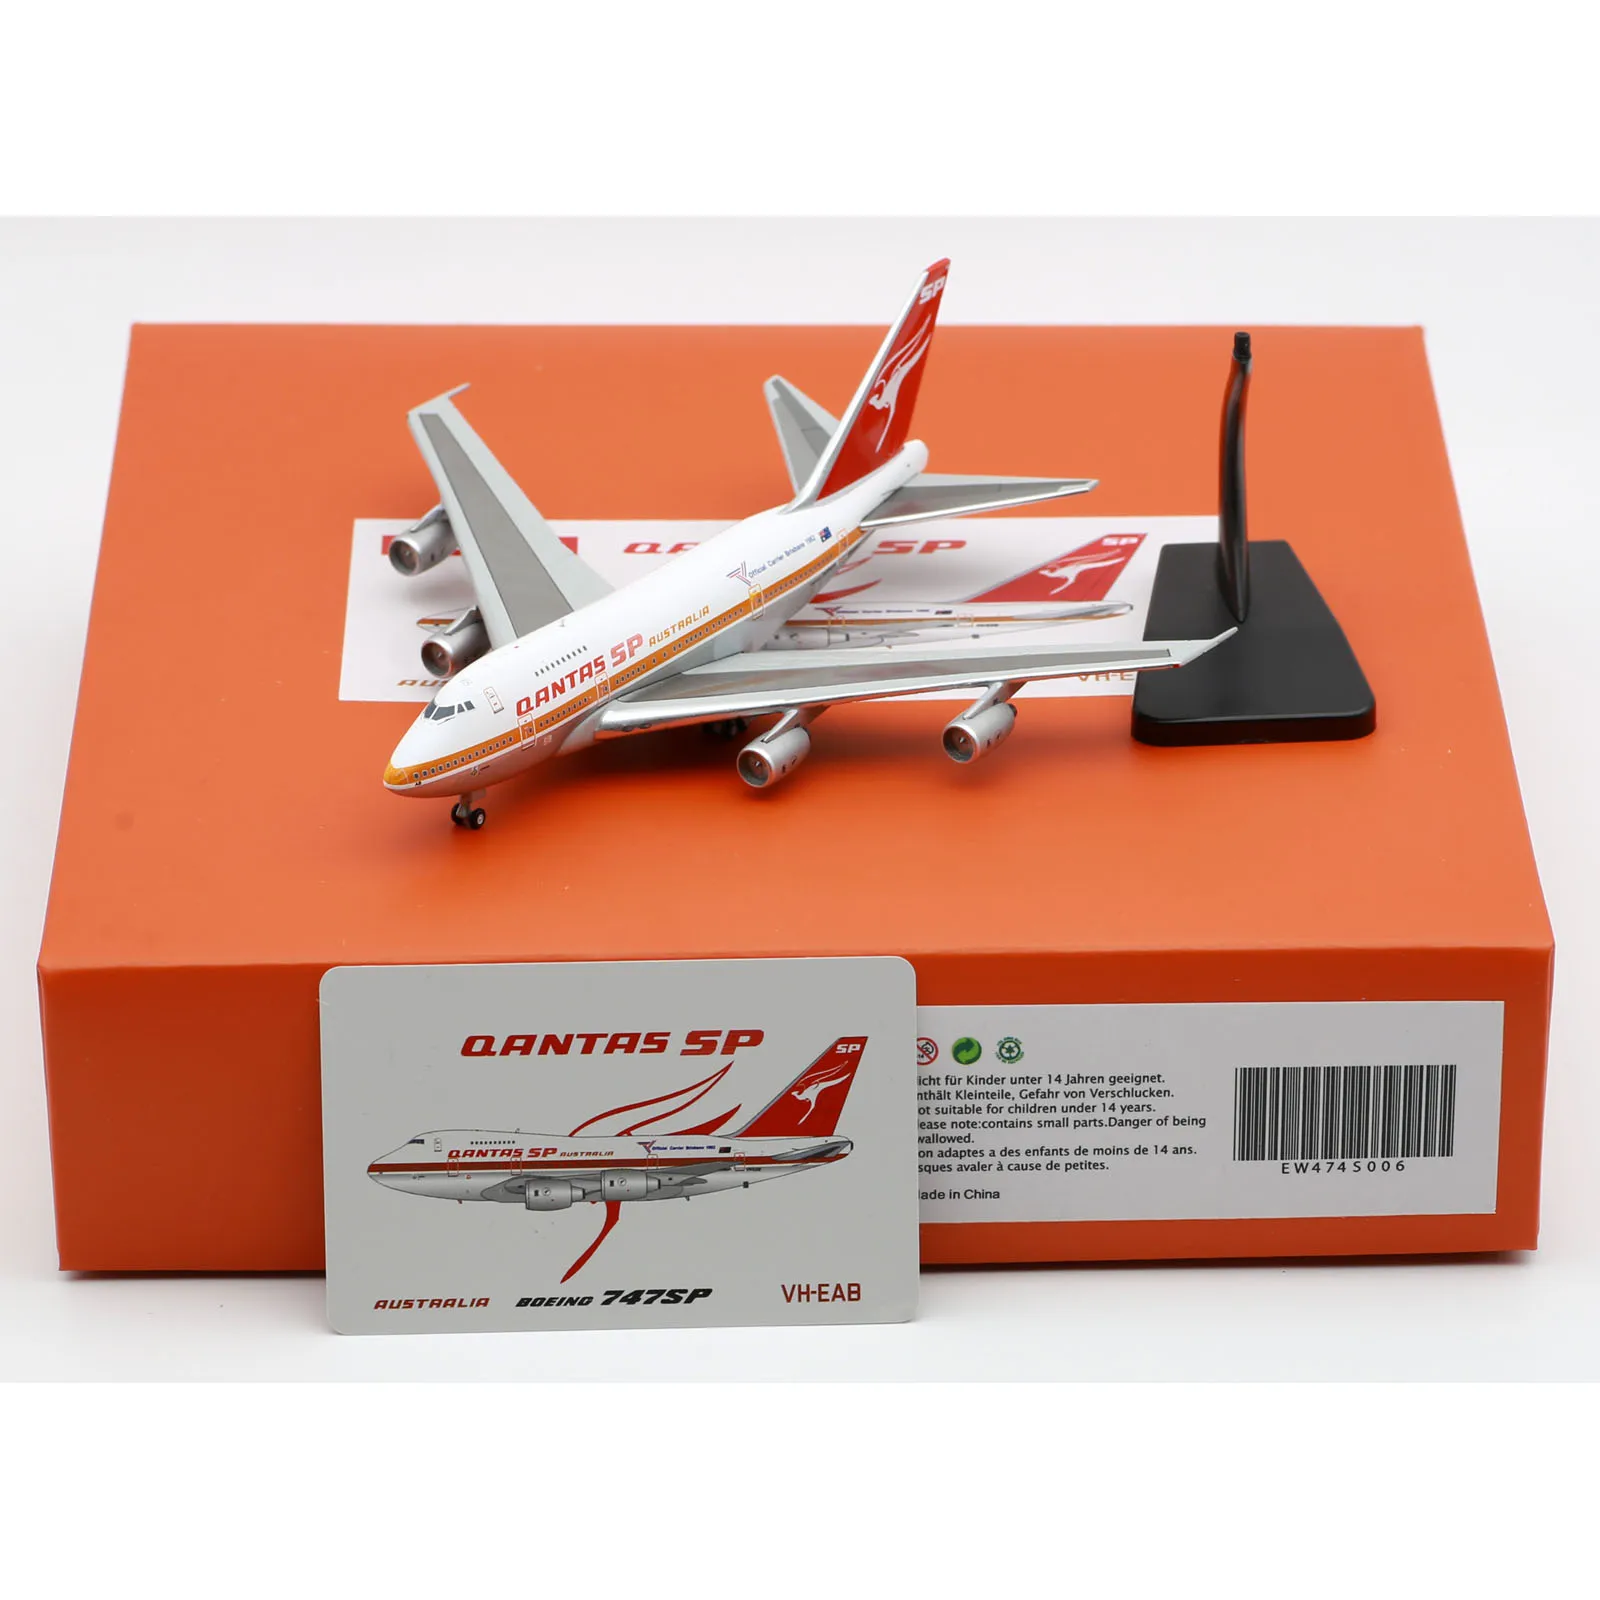 

EW474S006 Alloy Collectible Plane Gift JC Wings 1:400 Qantas Airlines Boeing B747SP Diecast Aircraft Jet Model VH-EAB With Stand